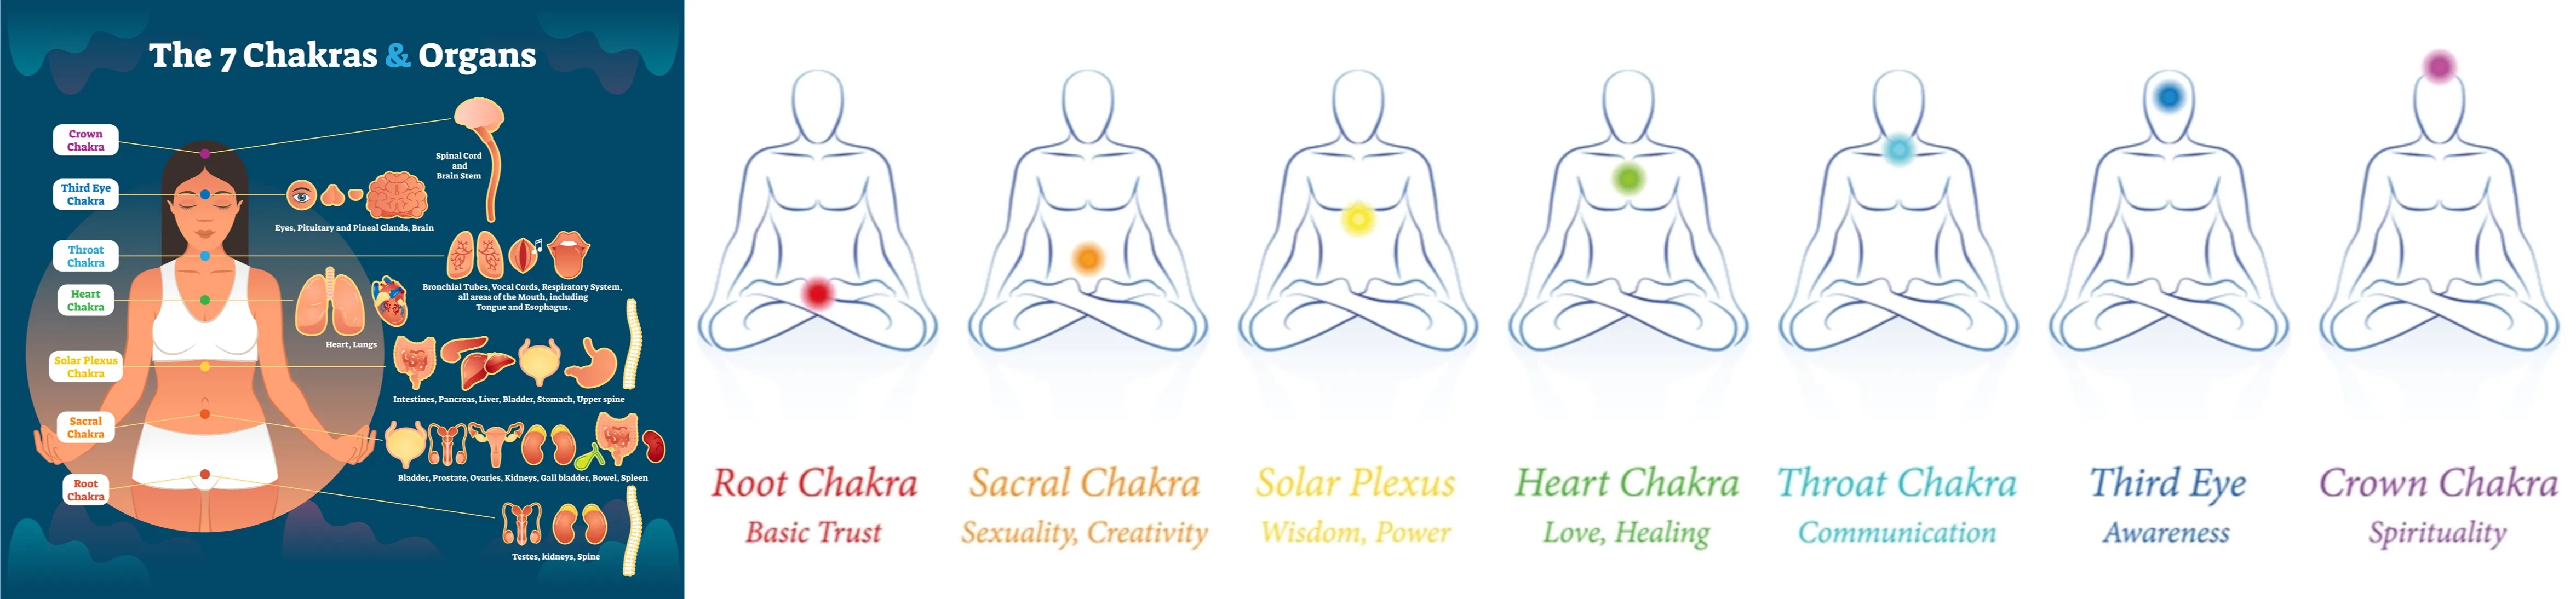 The 7 human Chakras (Energy Centers) and organs they represent, with respective influential emotions.